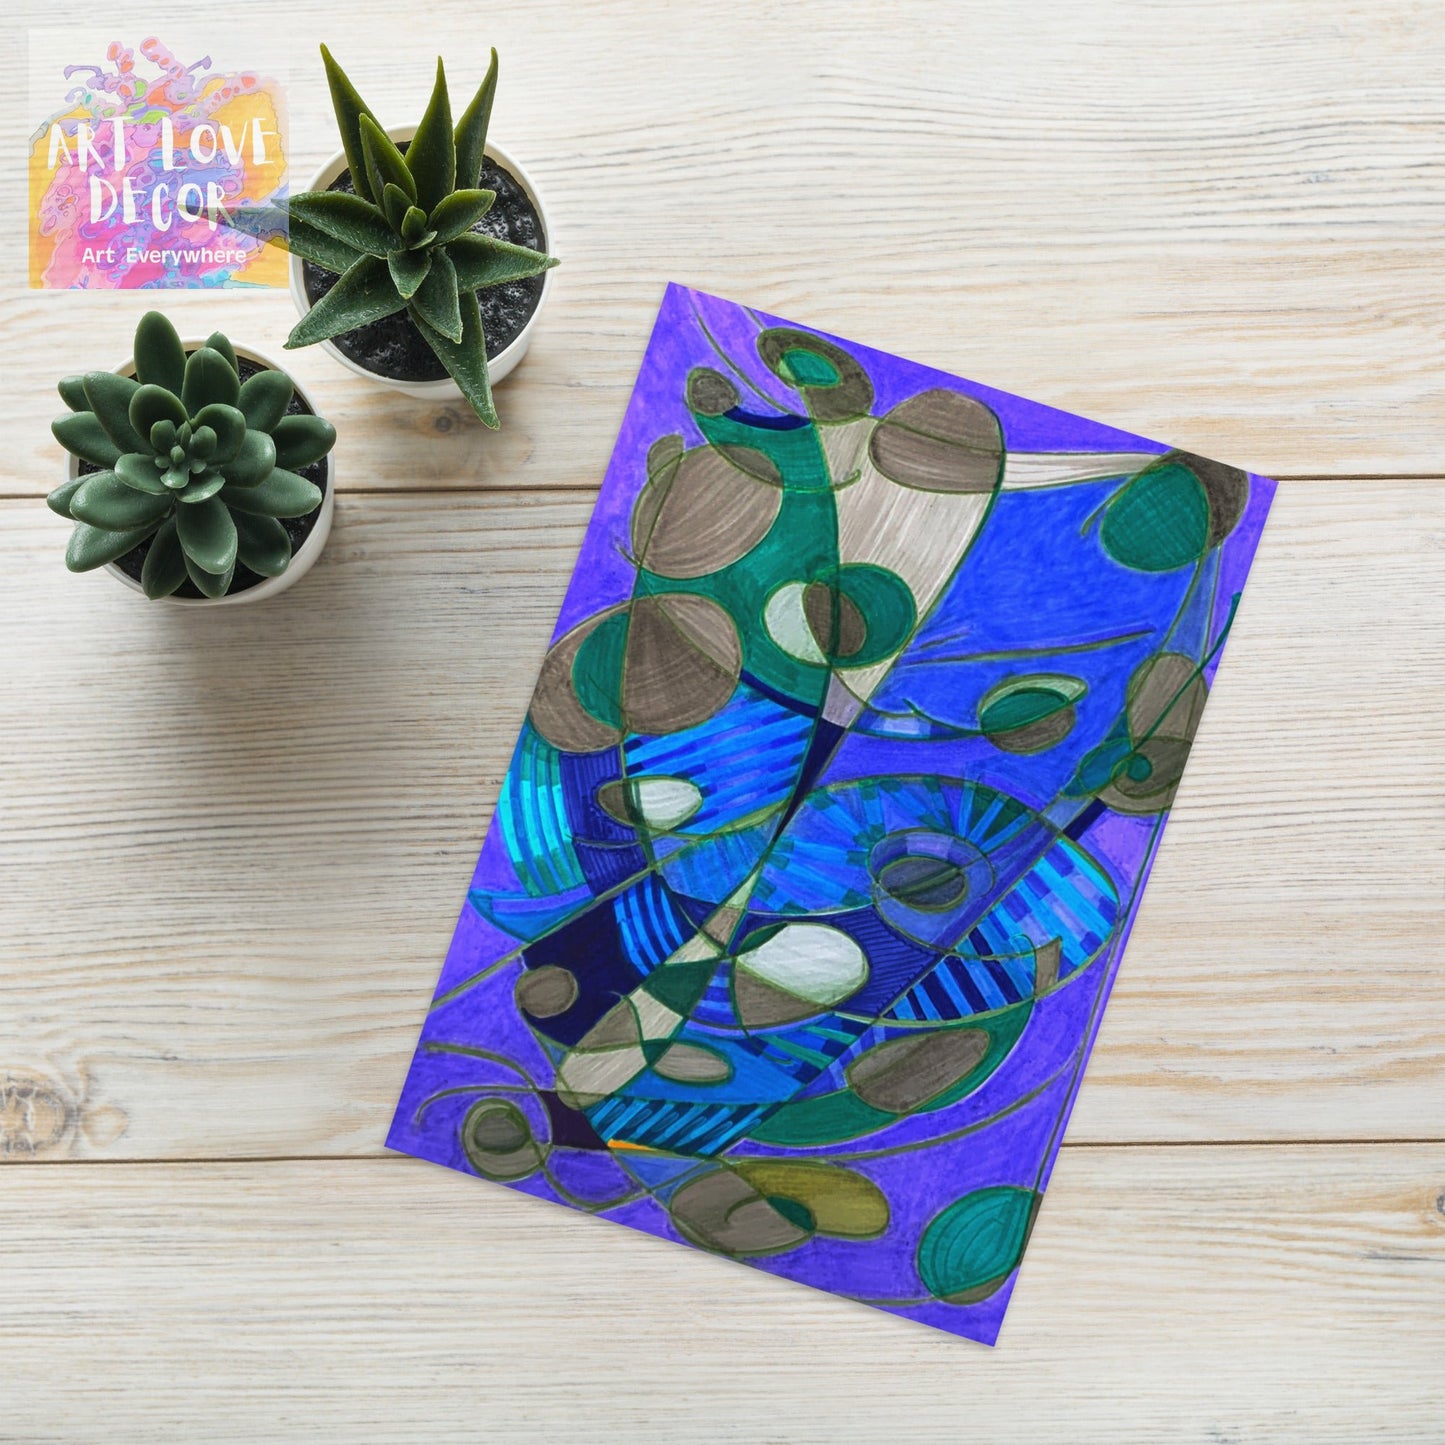 Knot Anymore Abstract Greeting card - Art Love Decor